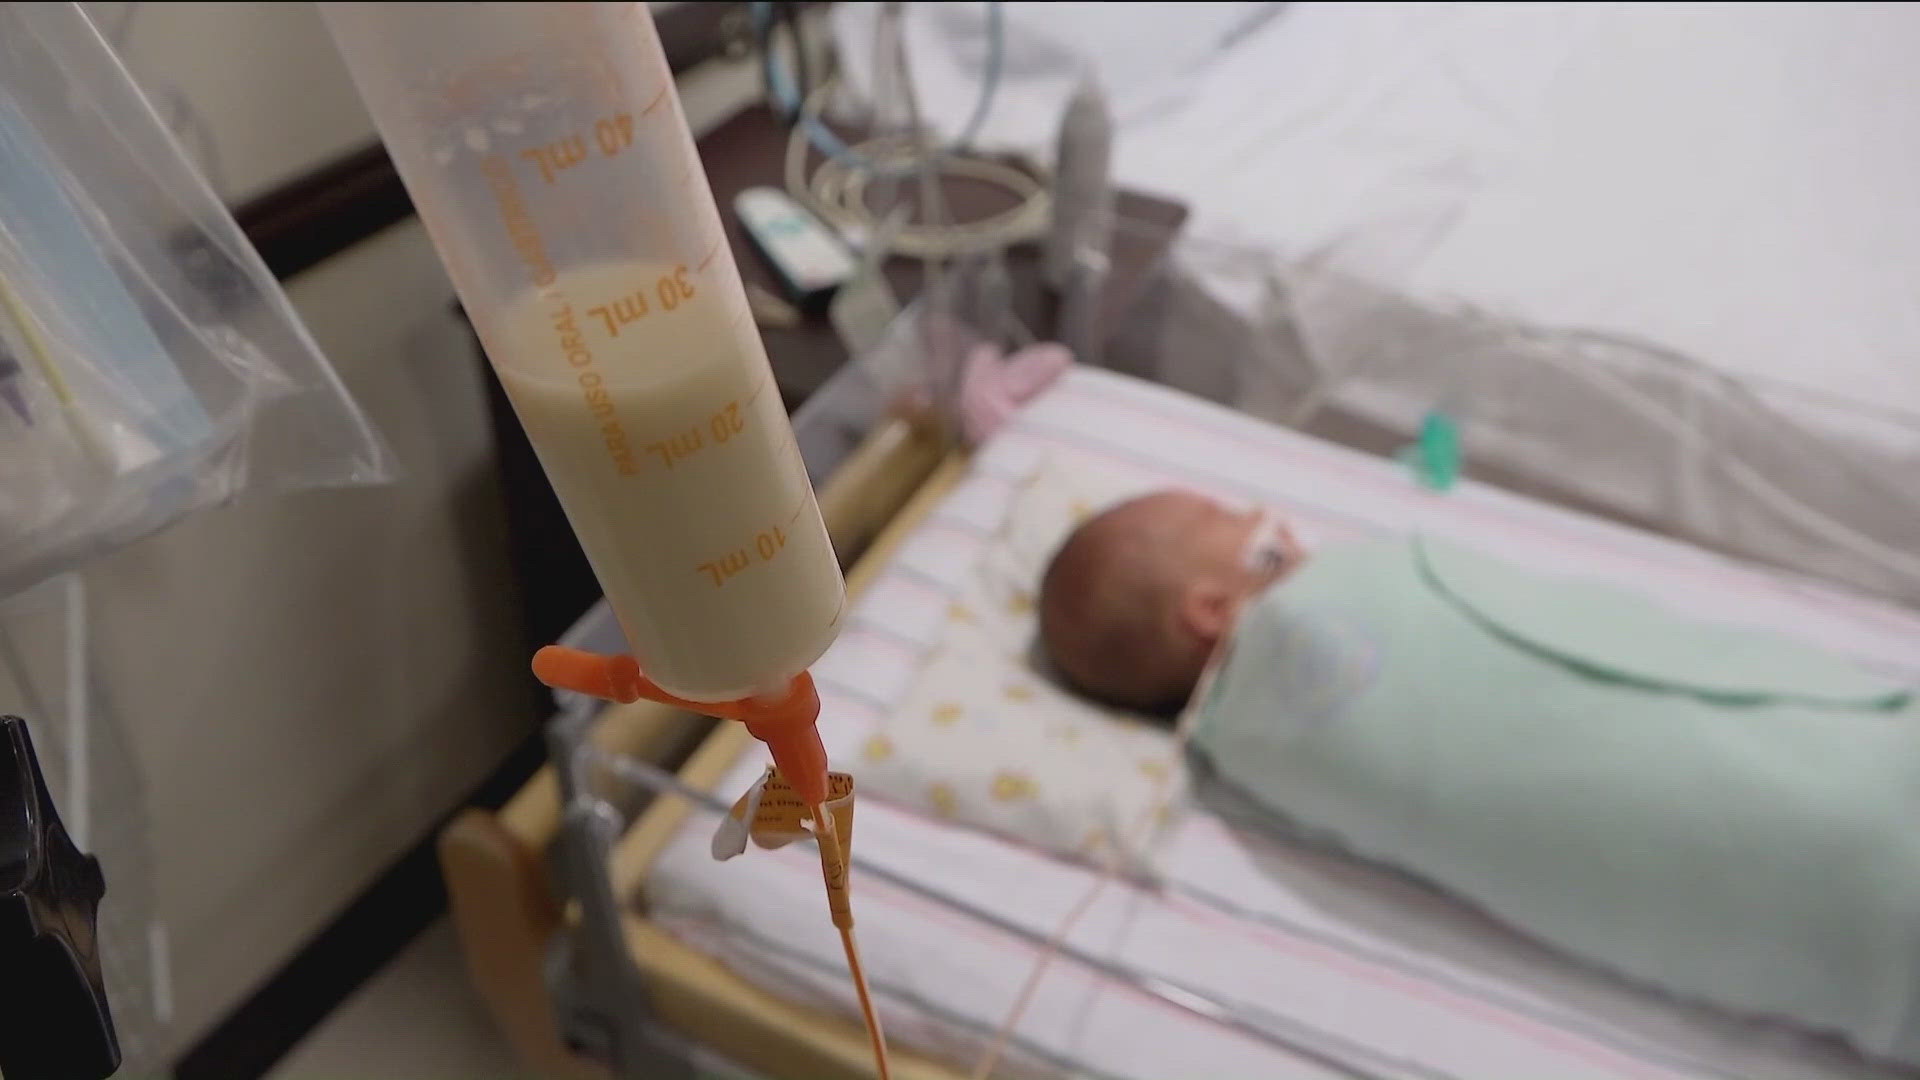 Hundreds of parents are suing, claiming formula makers failed to warn that premature infants fed cow’s milk formulas were at higher risk for a devastating illness.